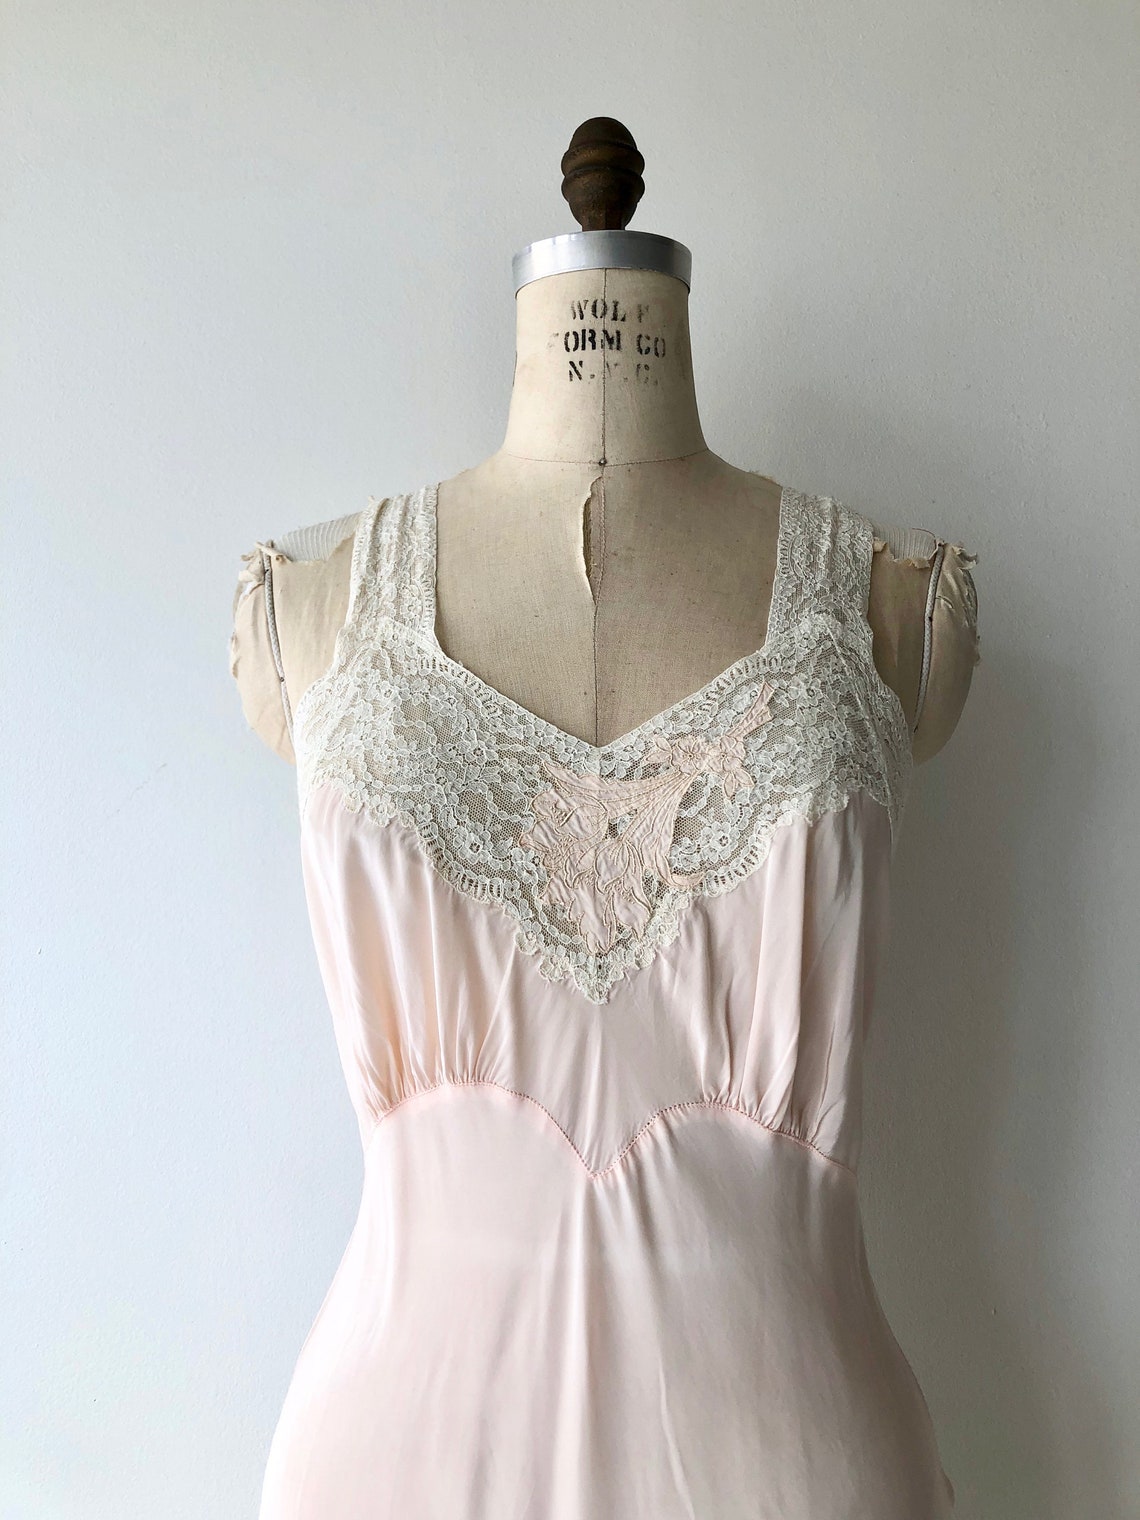 Selene rayon nightgown 1940s lingerie vintage 40s | Etsy